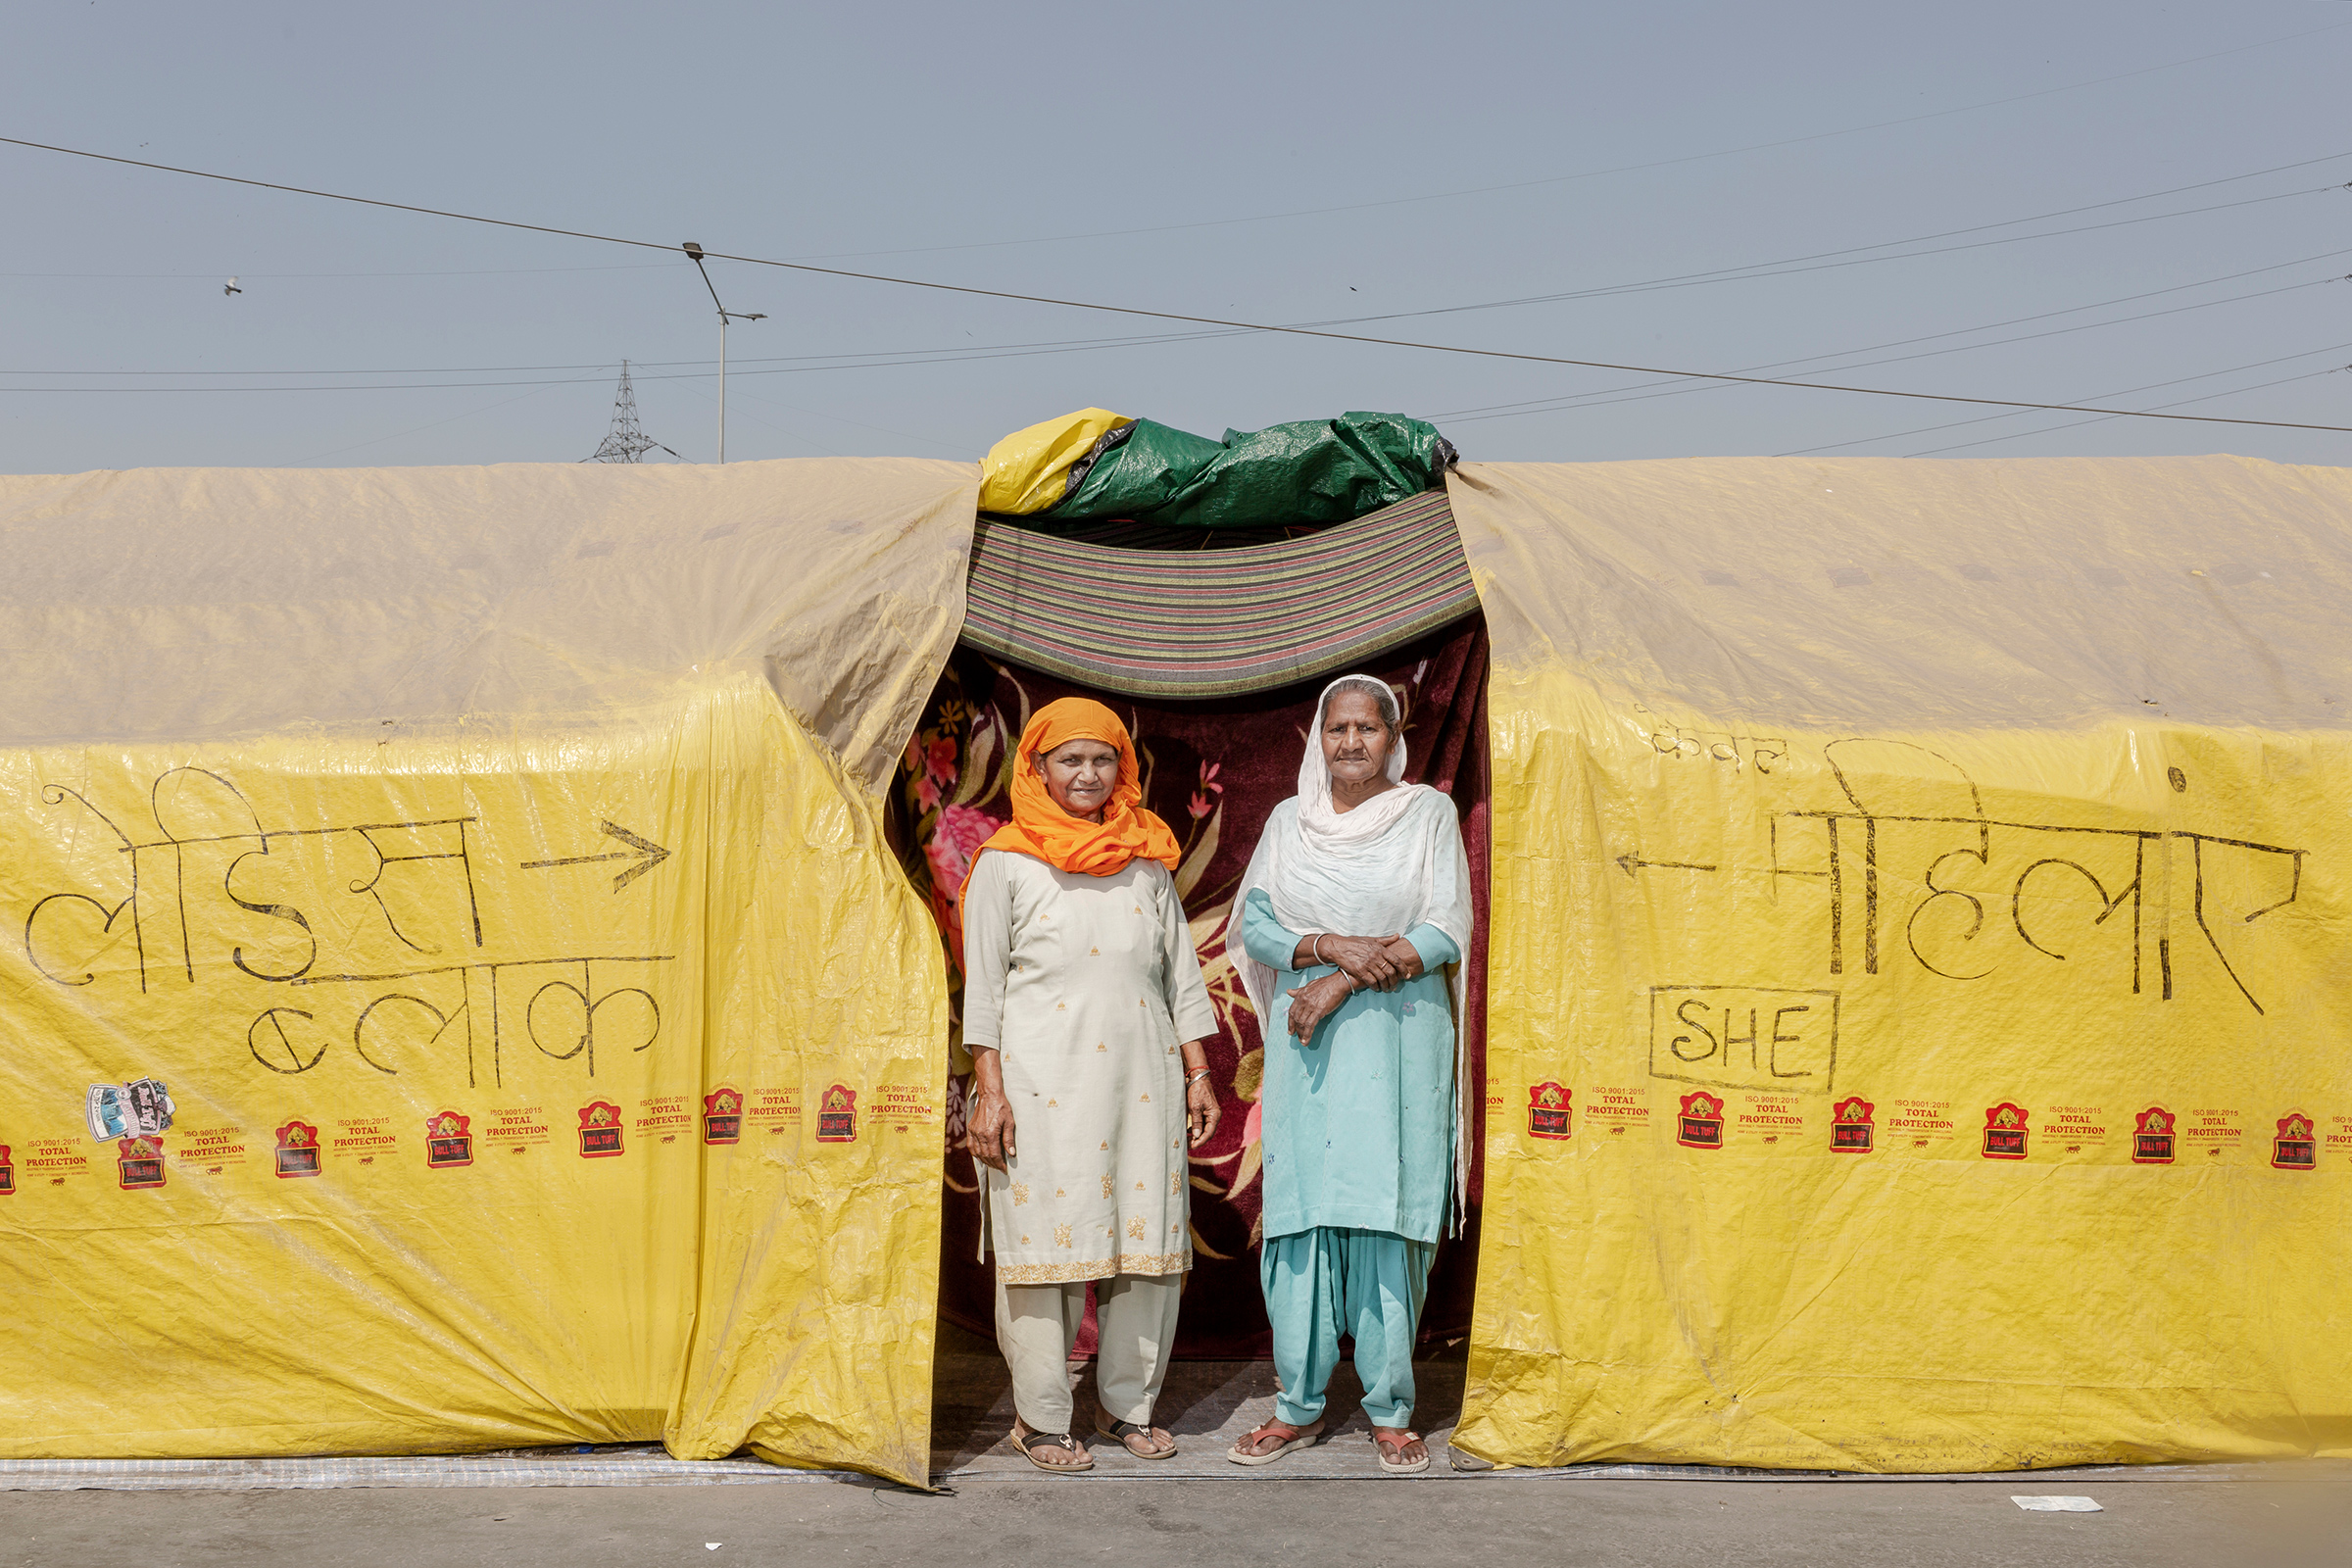 Sarjit Kaur, left, and Dilbeer Kaur, right, from Rampur, Uttar Pradesh, have been at the protests for two months. “We are here to show solidarity and support,” Dilbeer says. Prime Minister Modi is “making us leave our farms and sit here to fight for our rights. We are here to get these laws repealed, and we will be here till we get it done.” (Kanishka Sonthalia for TIME)